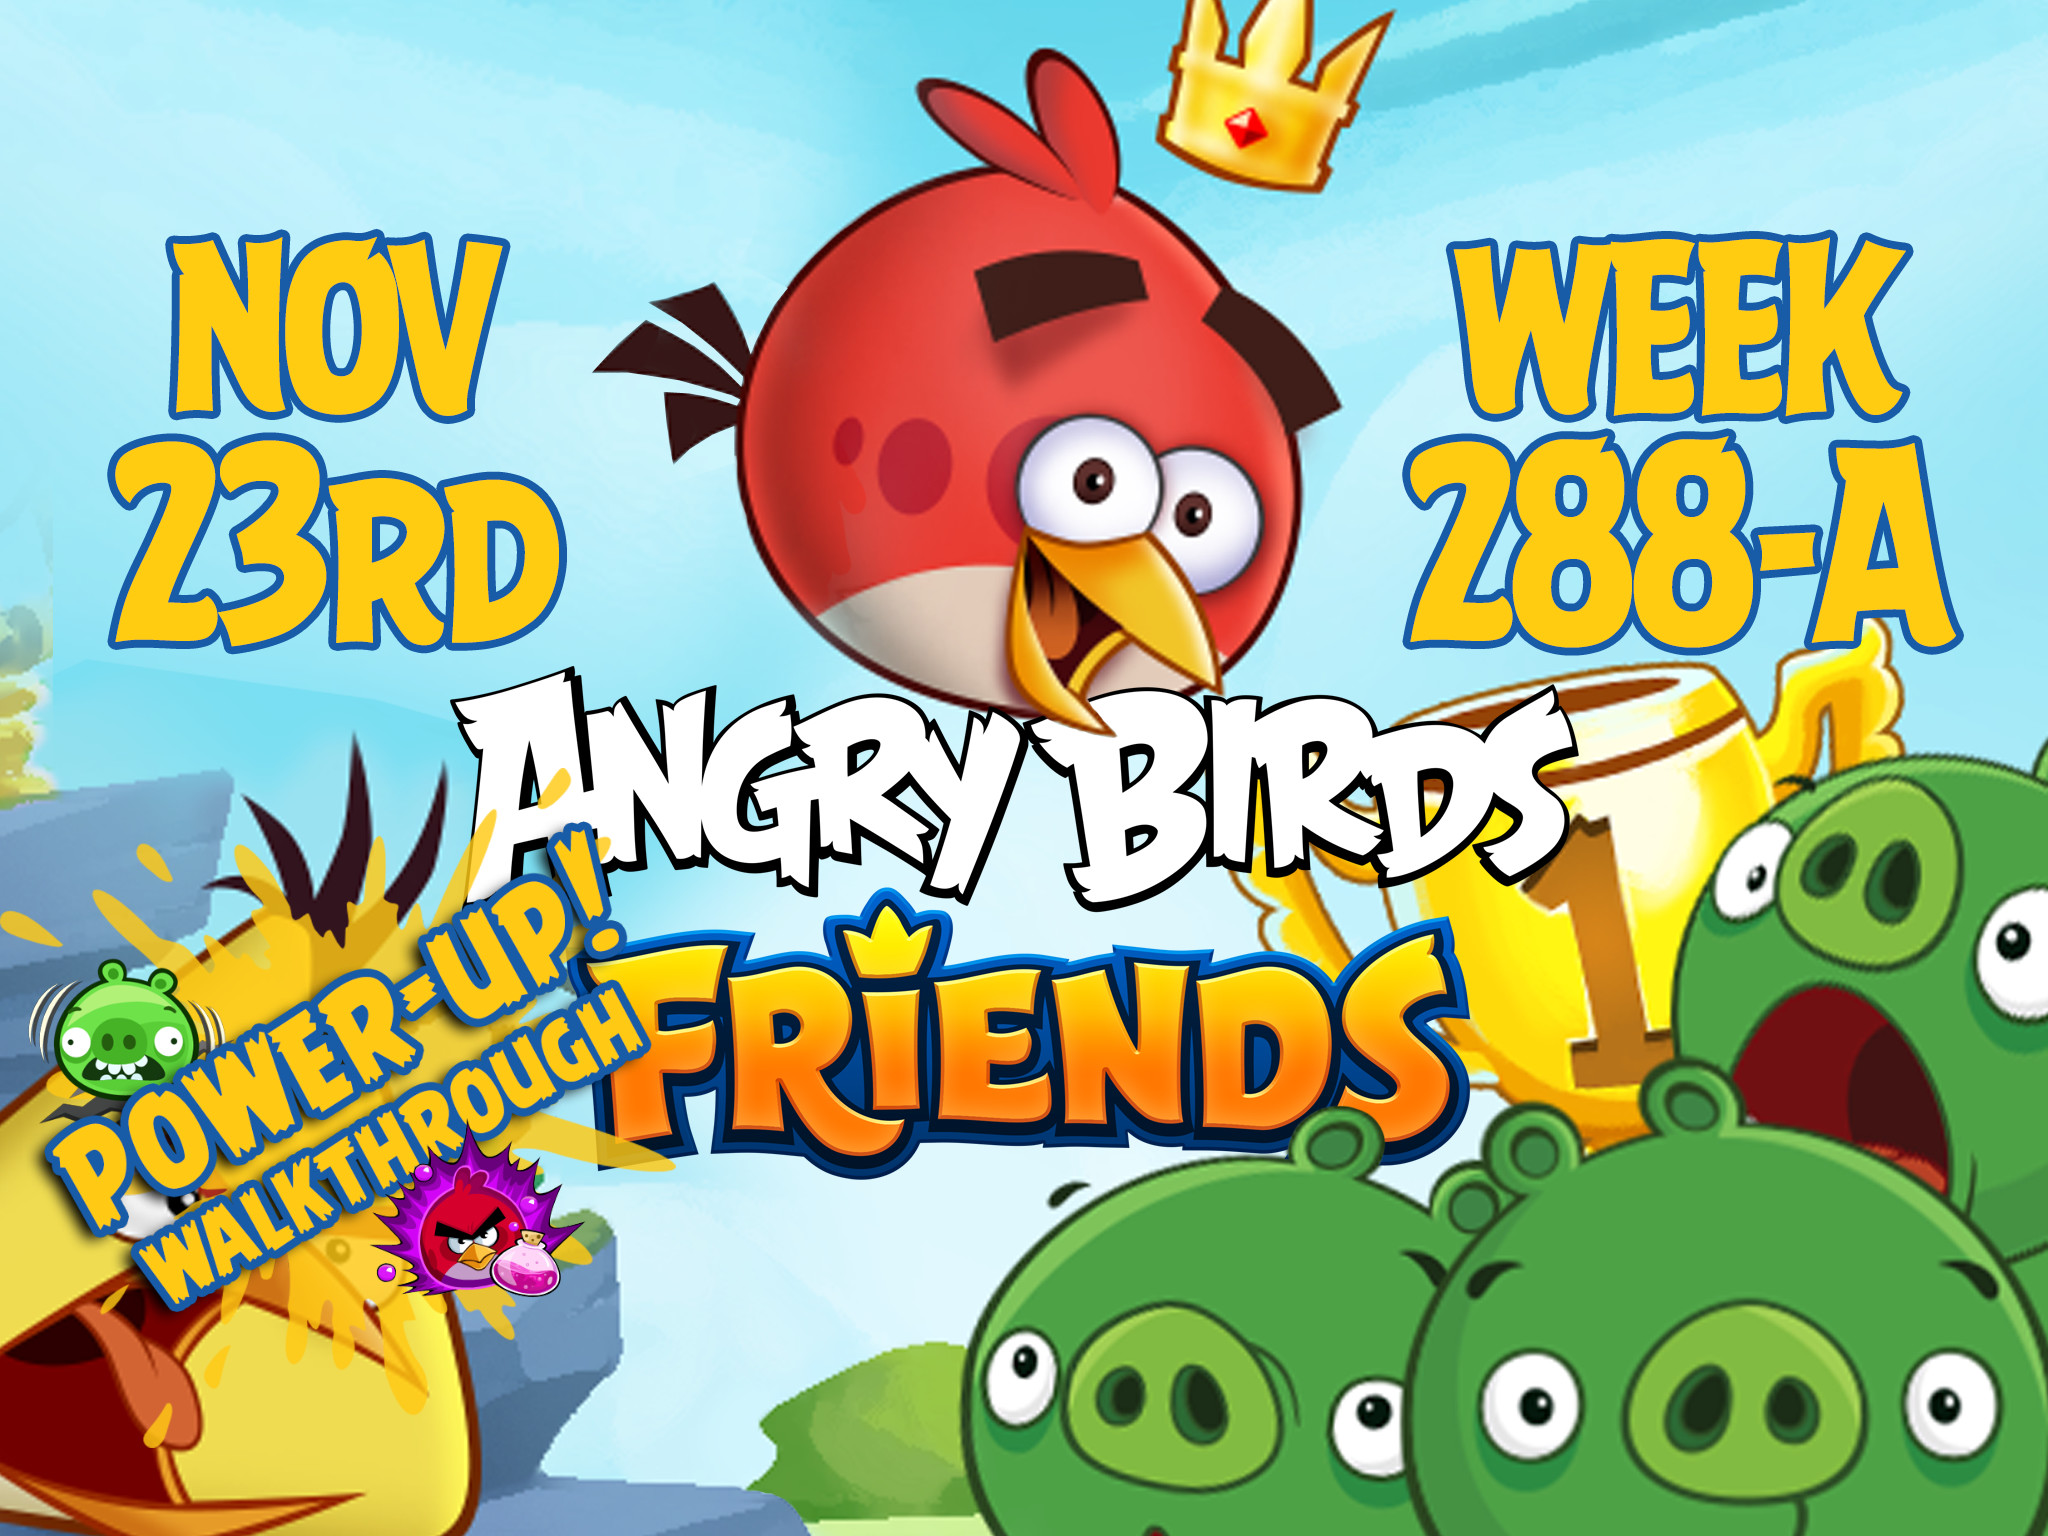 Angry Birds Friends Tournament Week 288-A Feature Image PU